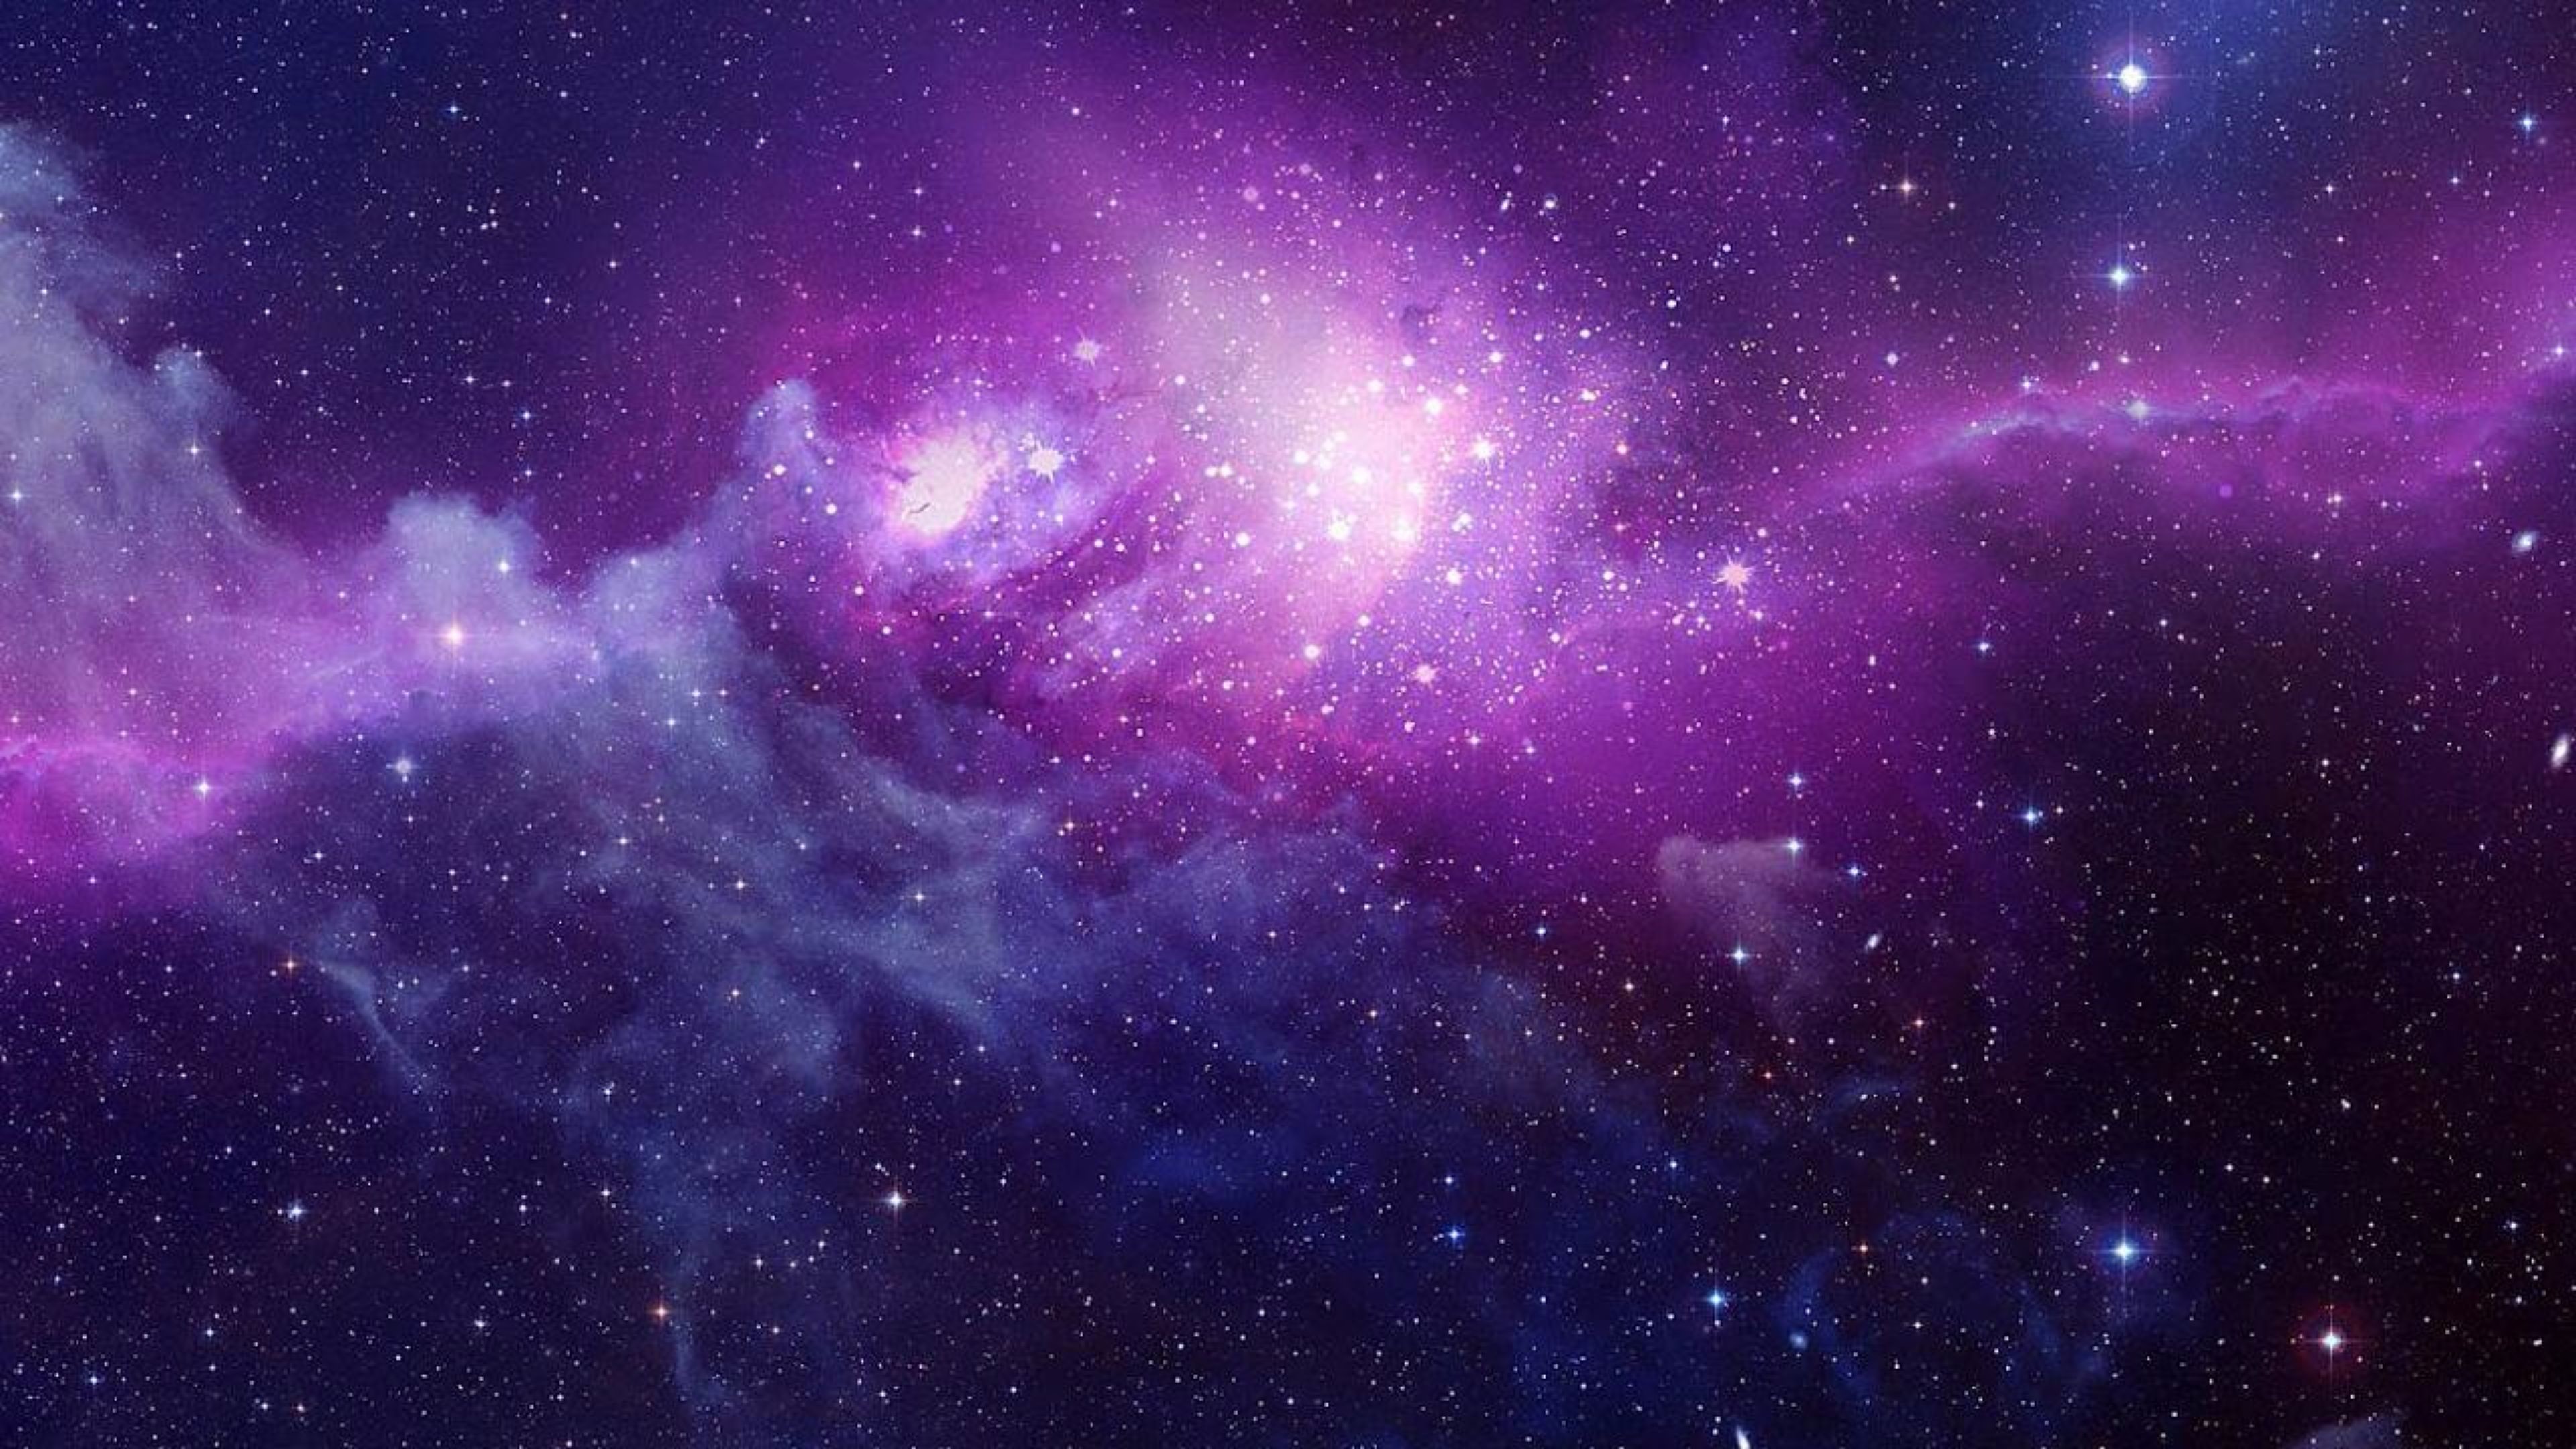 3840x2160 4K Space Wallpapers are the best... Here is a few I like.